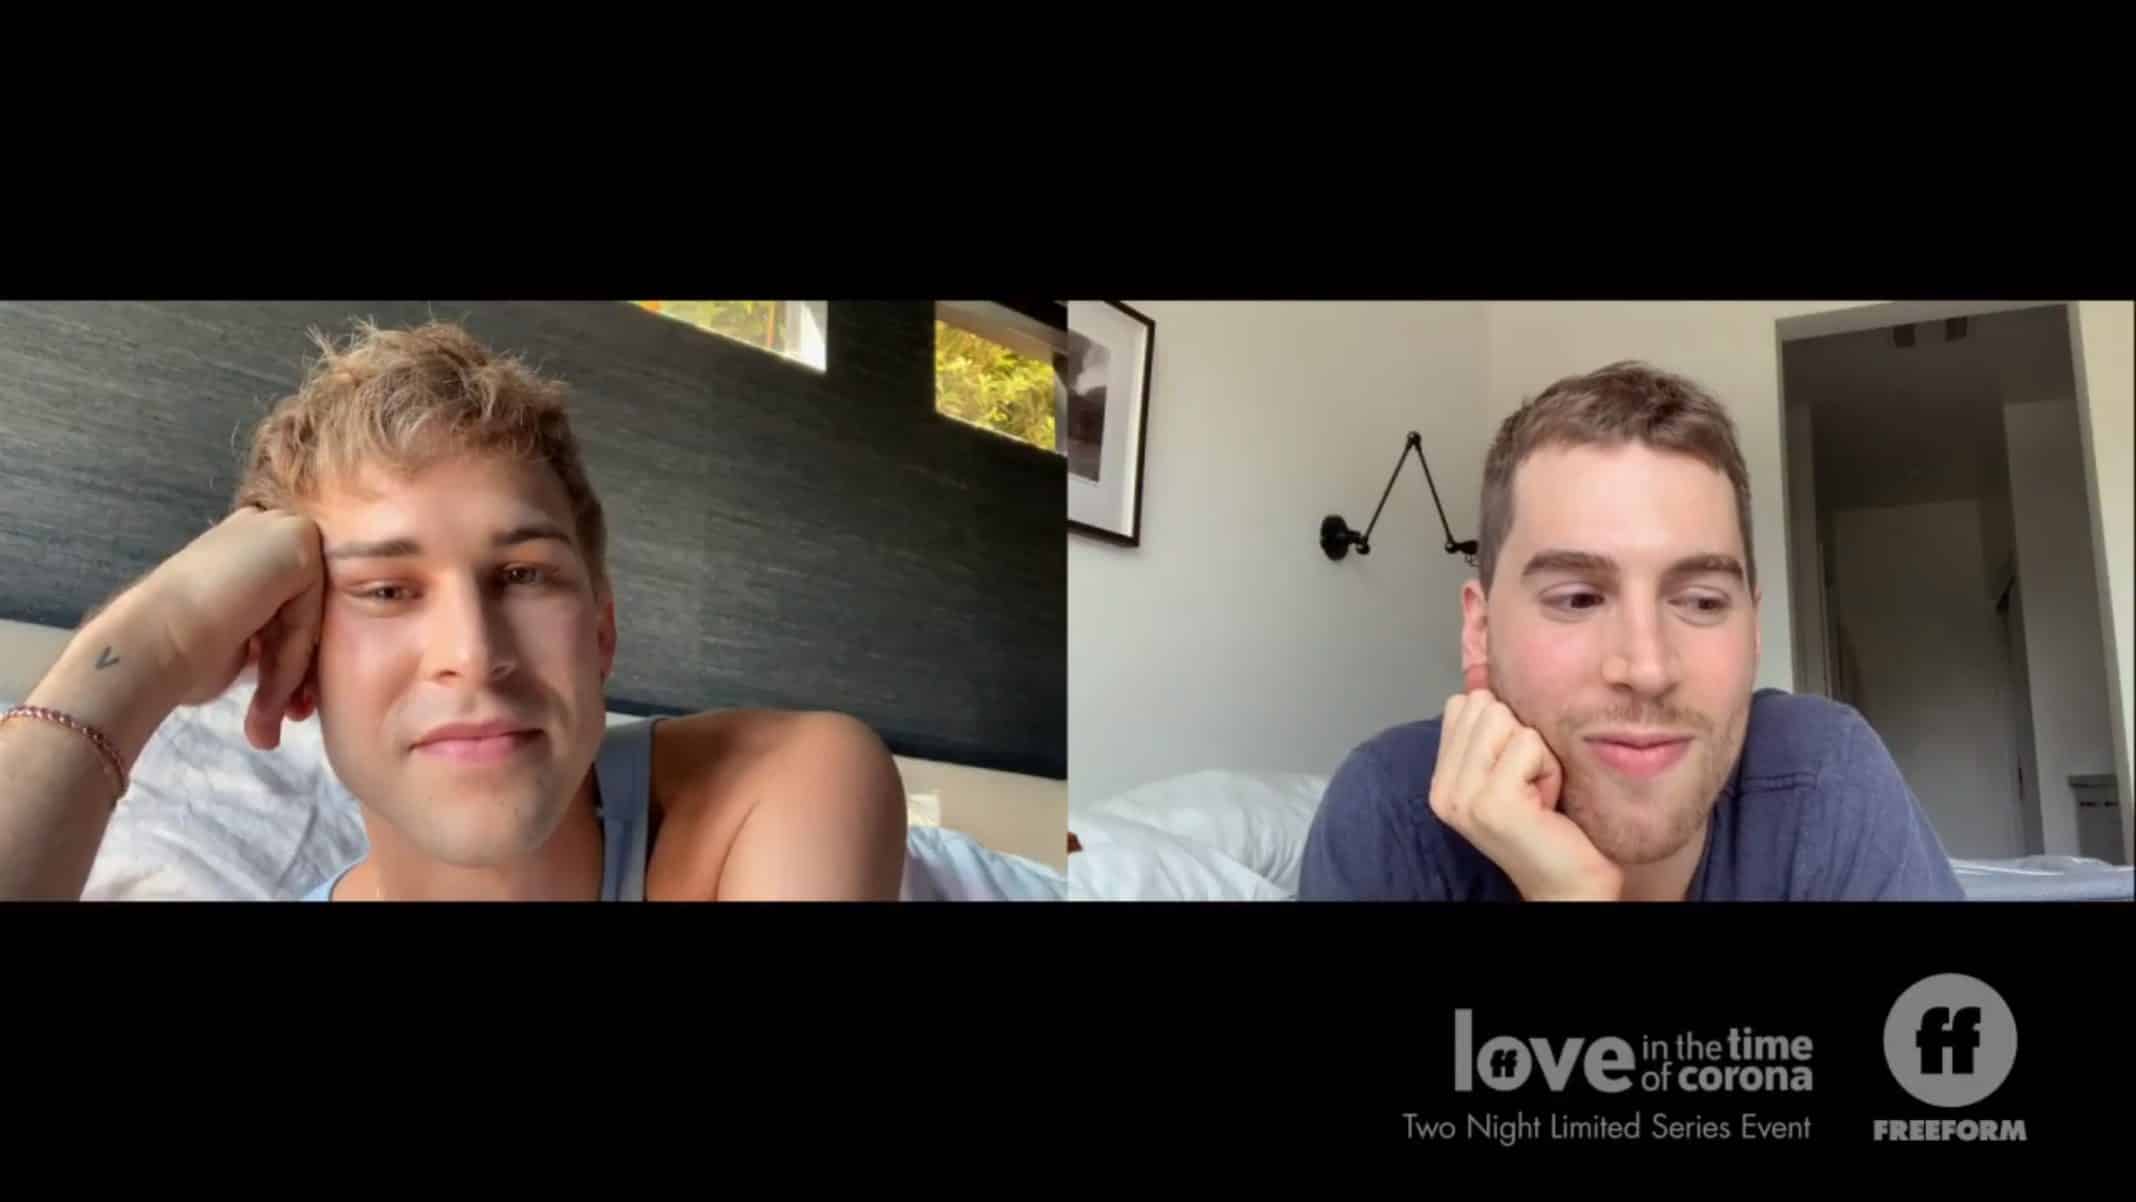 Oscar and Sean during a video call date.